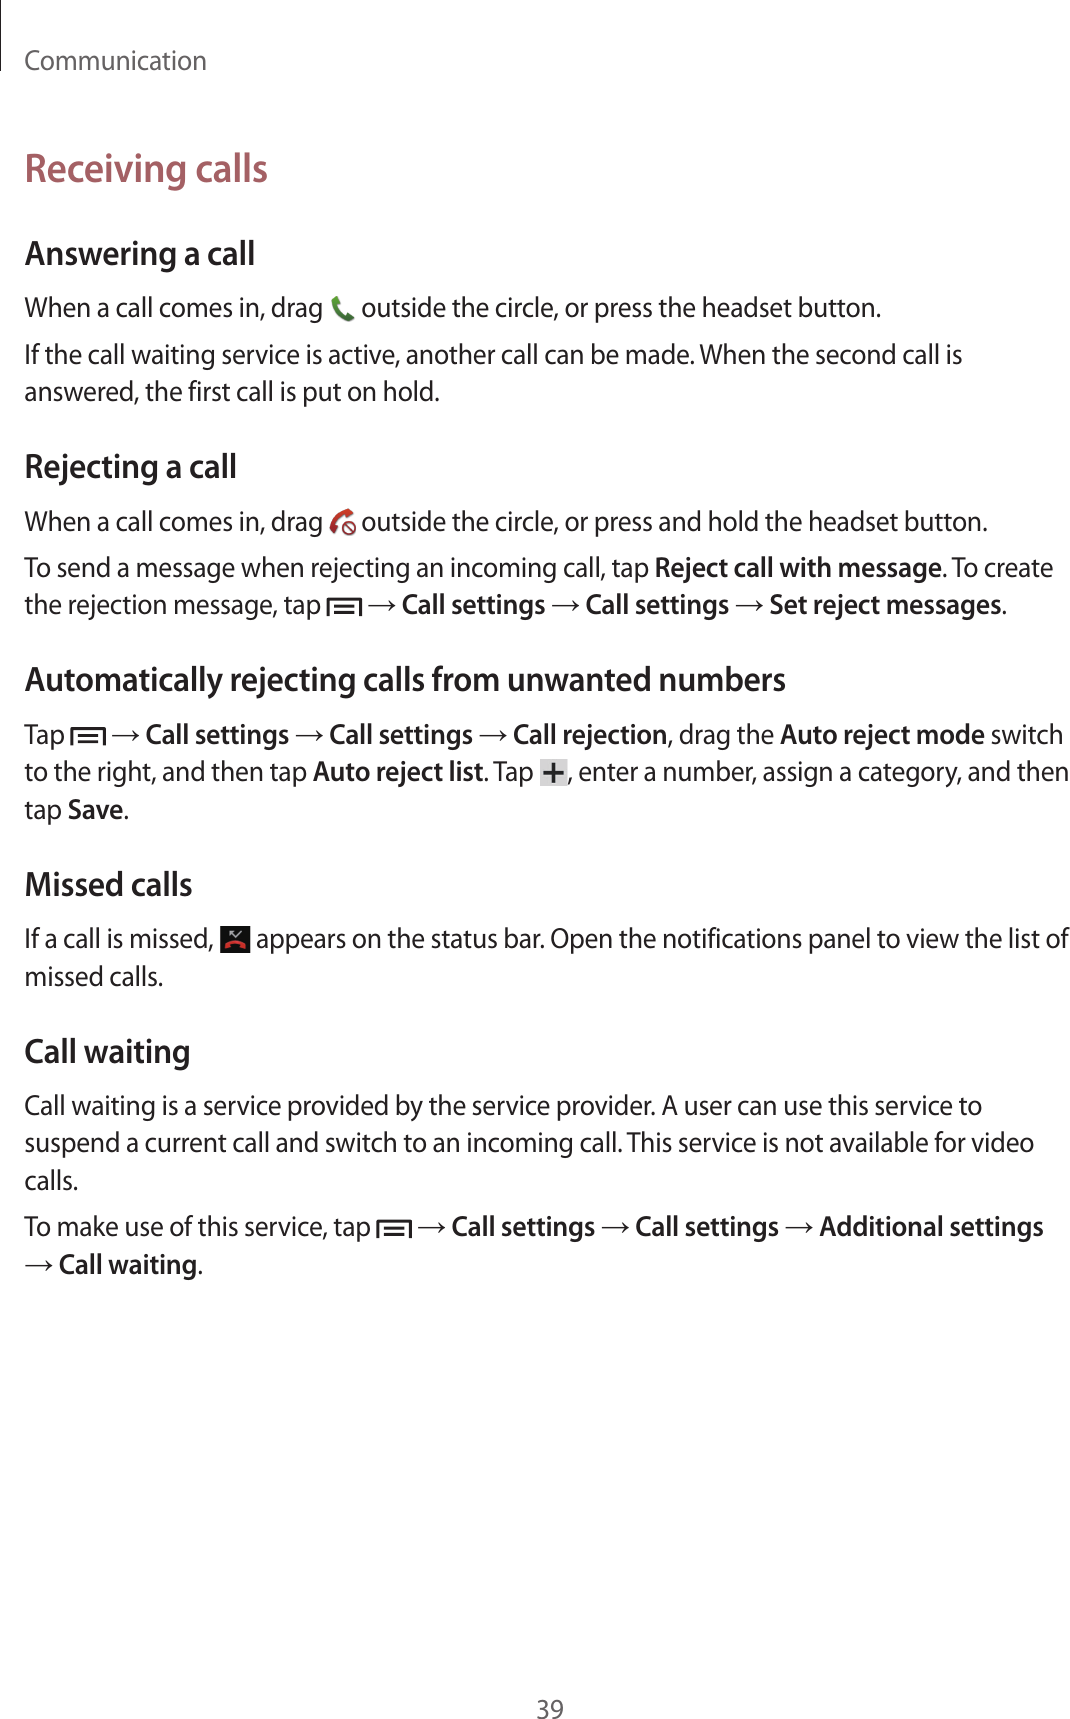 Communication39Receiving callsAnswering a callWhen a call comes in, drag   outside the circle, or press the headset button.If the call waiting service is active, another call can be made. When the second call is answered, the first call is put on hold.Rejecting a callWhen a call comes in, drag   outside the circle, or press and hold the headset button.To send a message when rejecting an incoming call, tap Reject call with message. To create the rejection message, tap   → Call settings → Call settings → Set reject messages.Automatically rejecting calls from unwanted numbersTap   → Call settings → Call settings → Call rejection, drag the Auto reject mode switch to the right, and then tap Auto reject list. Tap  , enter a number, assign a category, and then tap Save.Missed callsIf a call is missed,   appears on the status bar. Open the notifications panel to view the list of missed calls.Call waitingCall waiting is a service provided by the service provider. A user can use this service to suspend a current call and switch to an incoming call. This service is not available for video calls.To make use of this service, tap   → Call settings → Call settings → Additional settings → Call waiting.